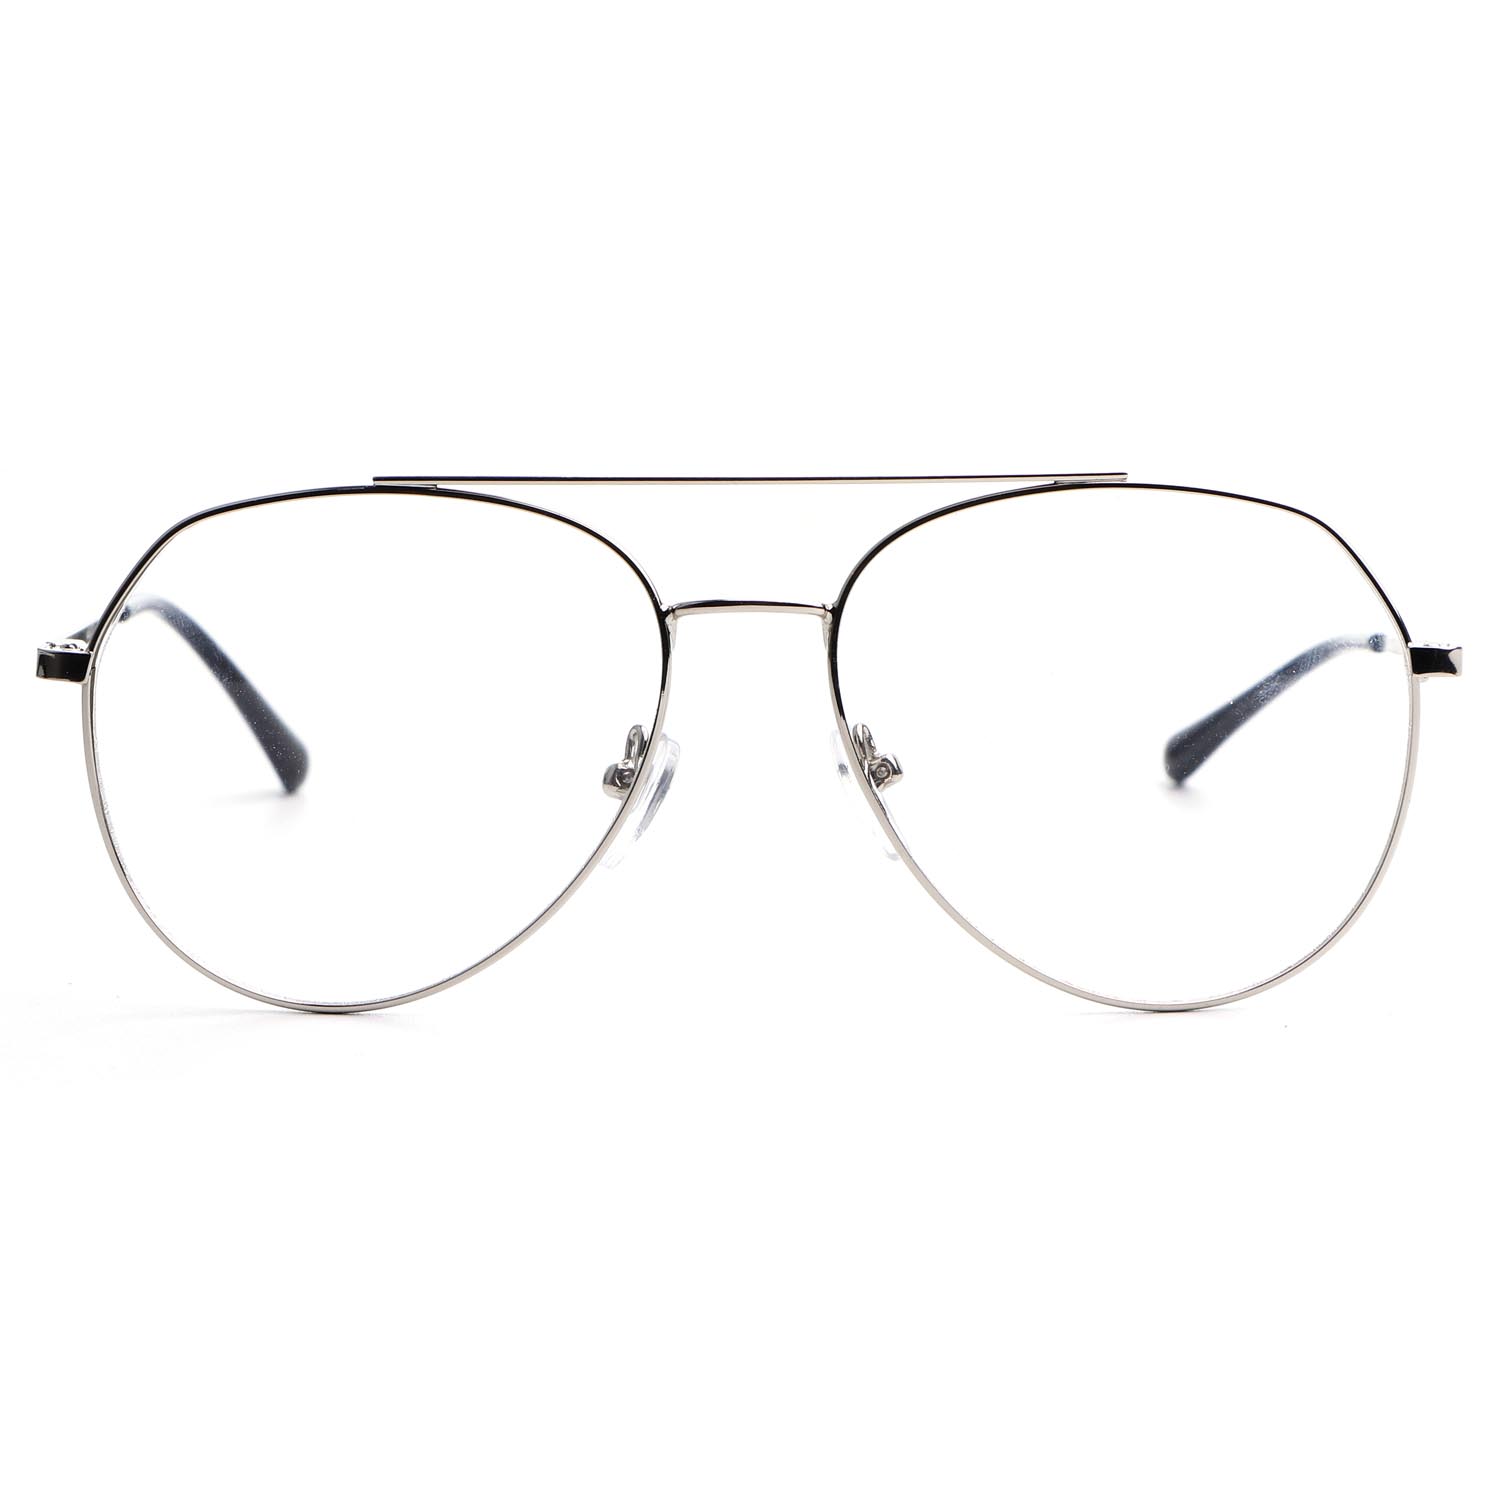 Kids' and teens' glasses from LINDBERG – The world's best